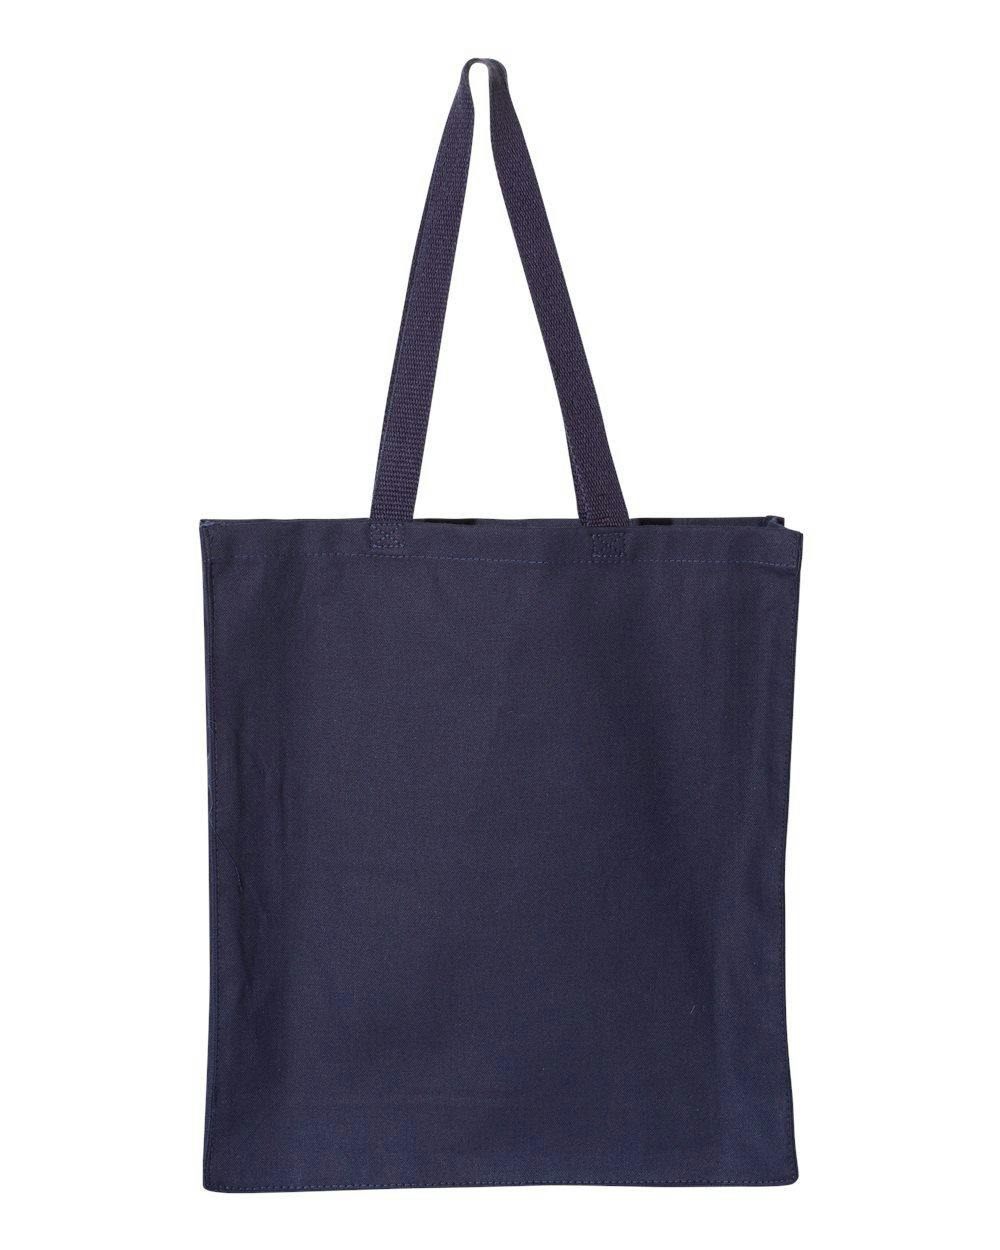 Image for Promotional Shopper Tote - OAD100